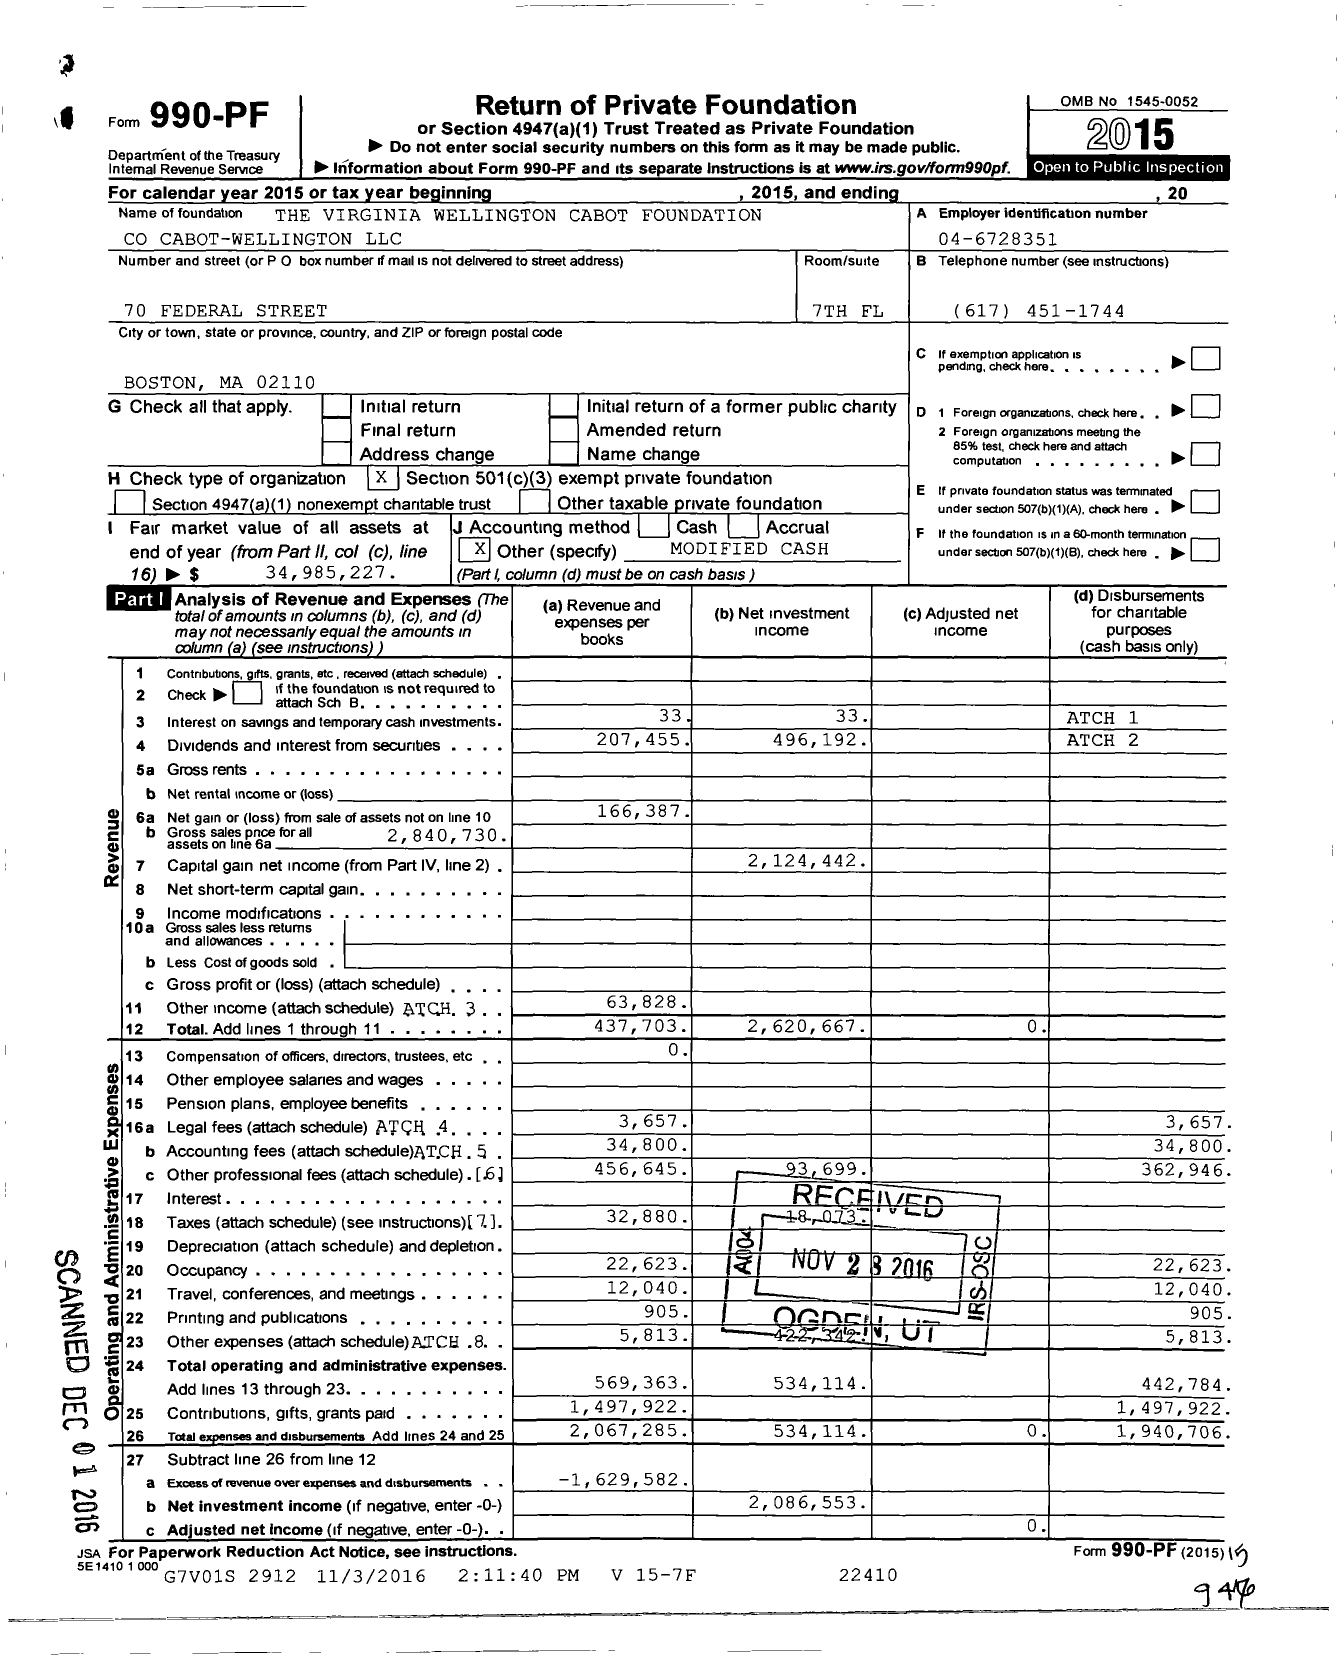 Image of first page of 2015 Form 990PF for The Virginia Wellington Cabot Foundation